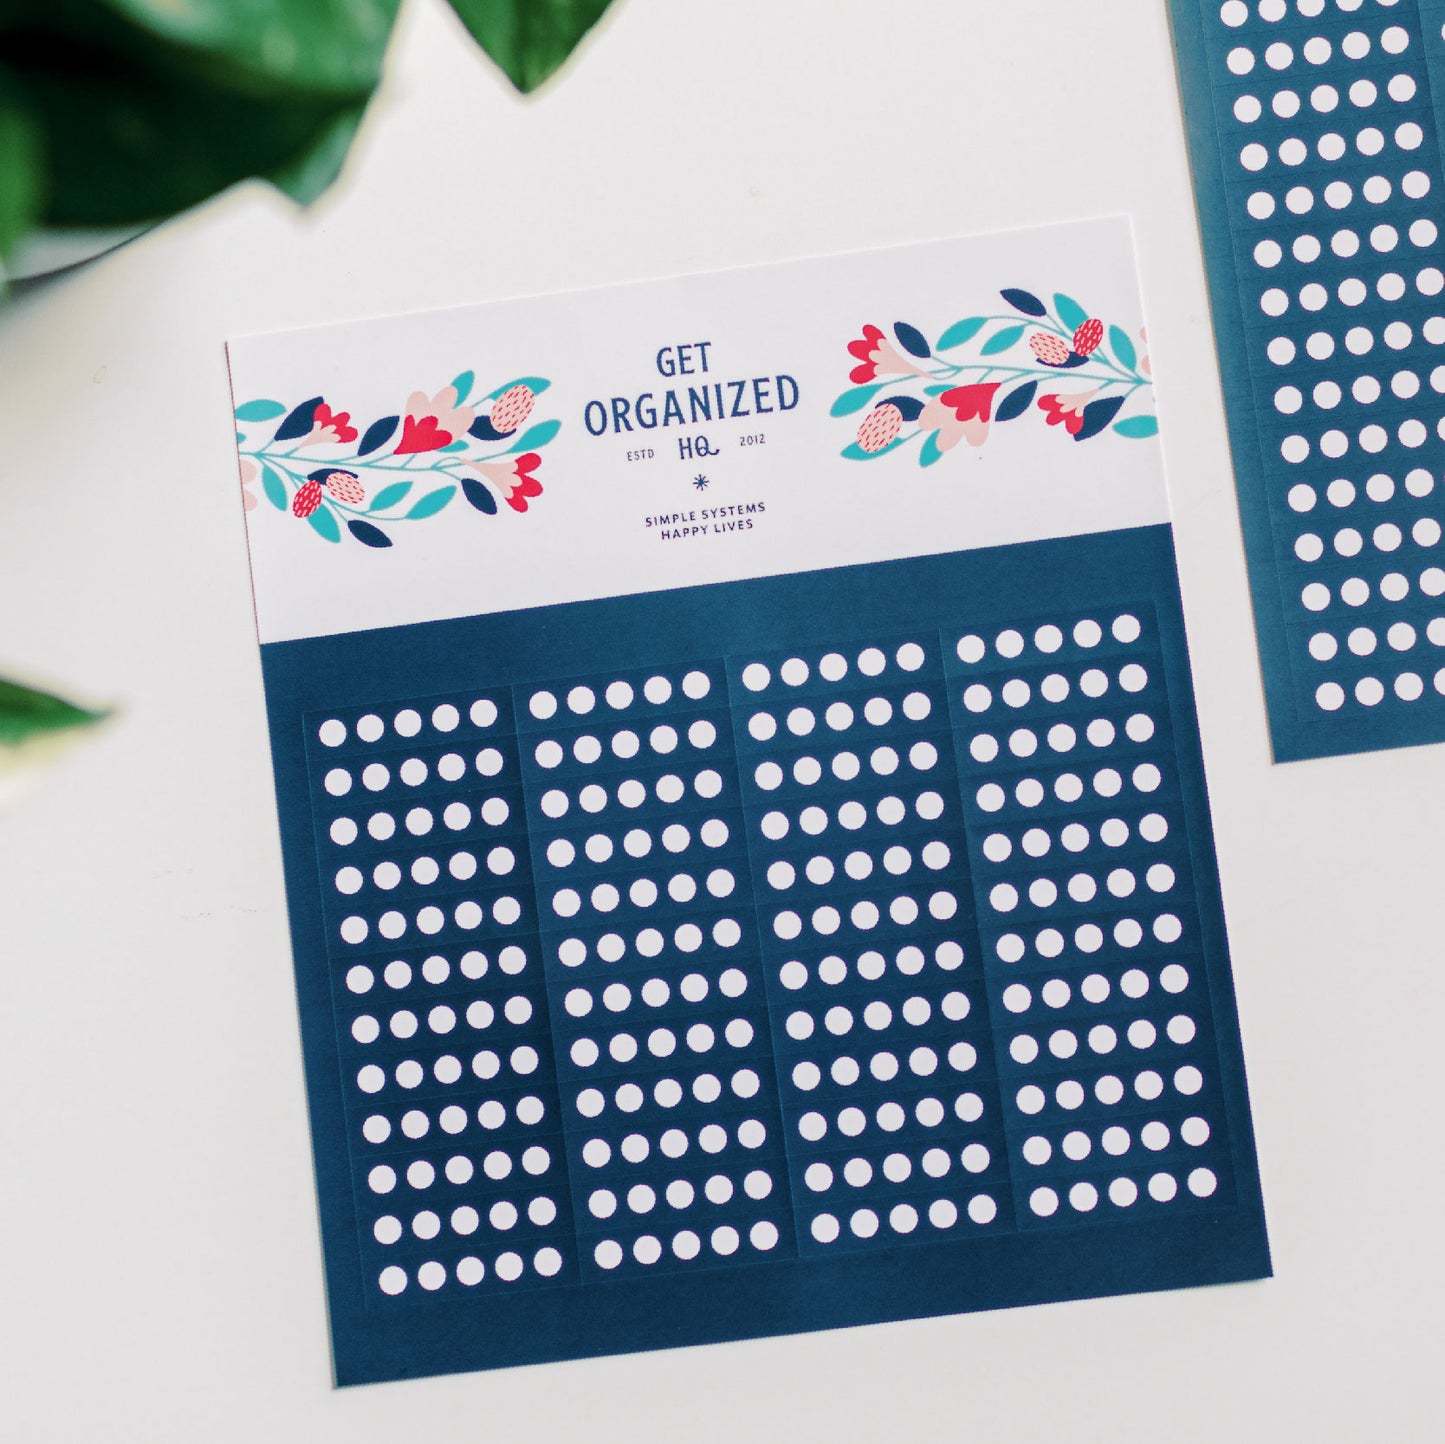 DIY Daily To-Dos: Planner stickers